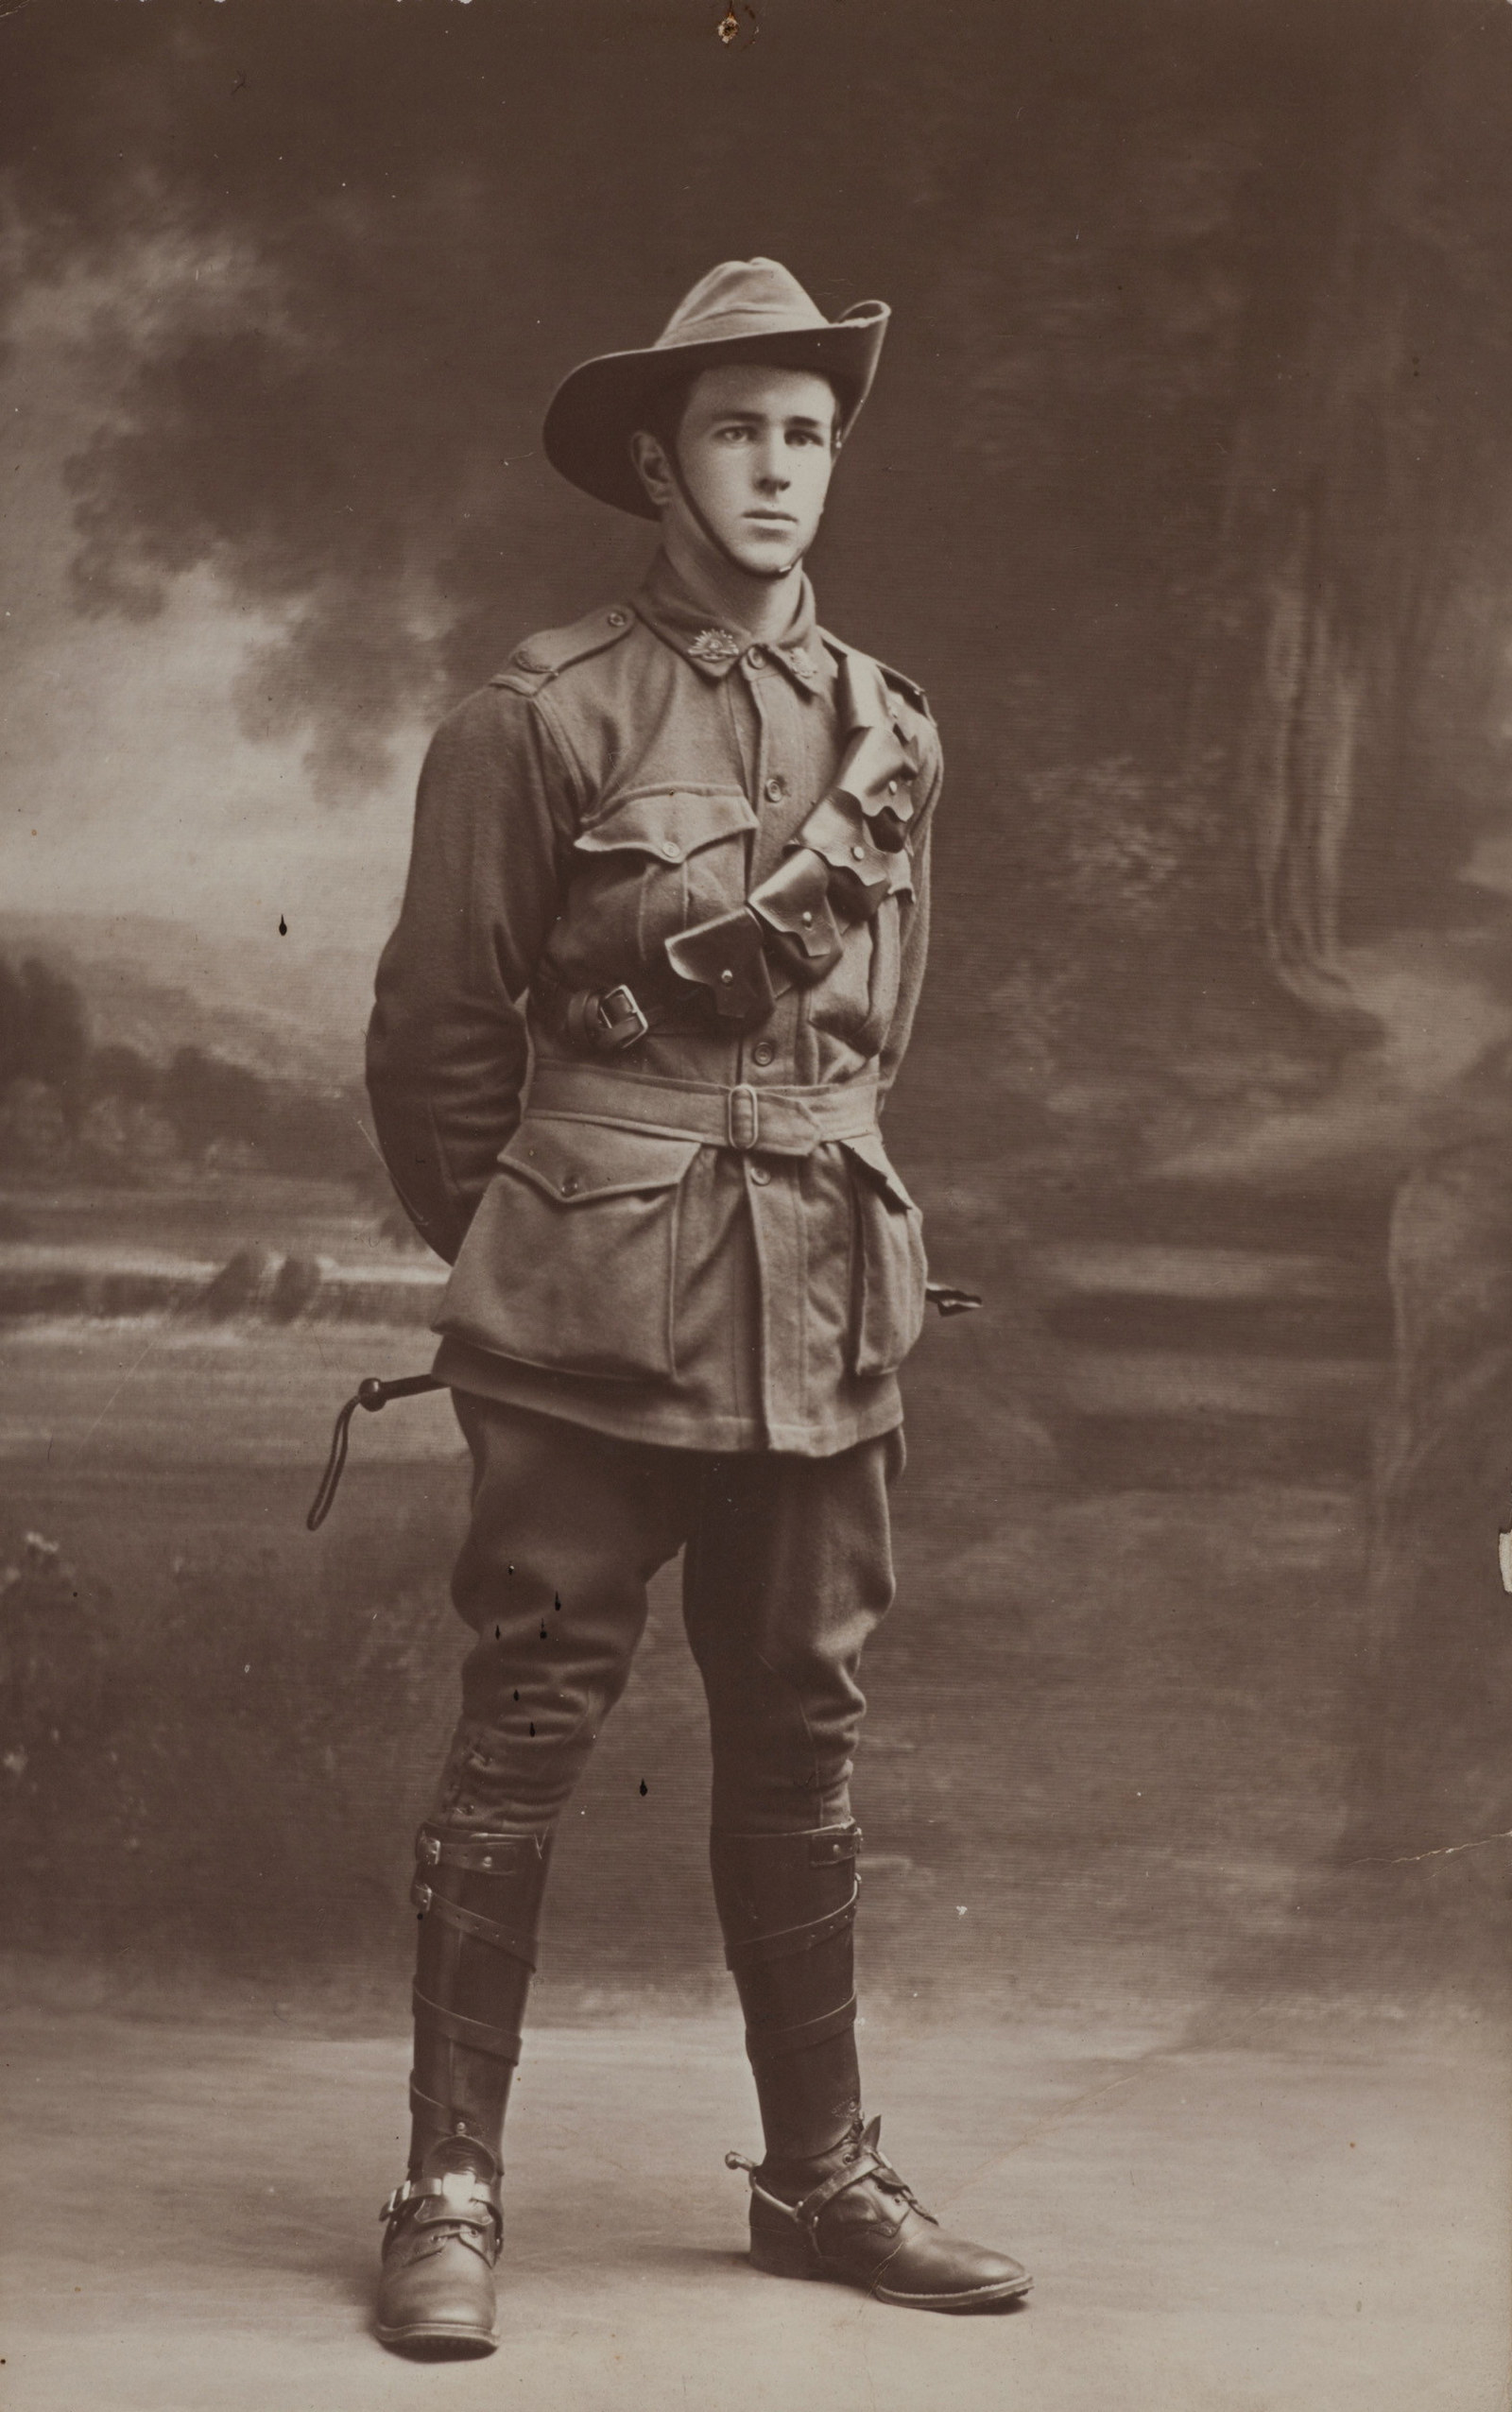 Black and white full length portrait of young man in uniform.